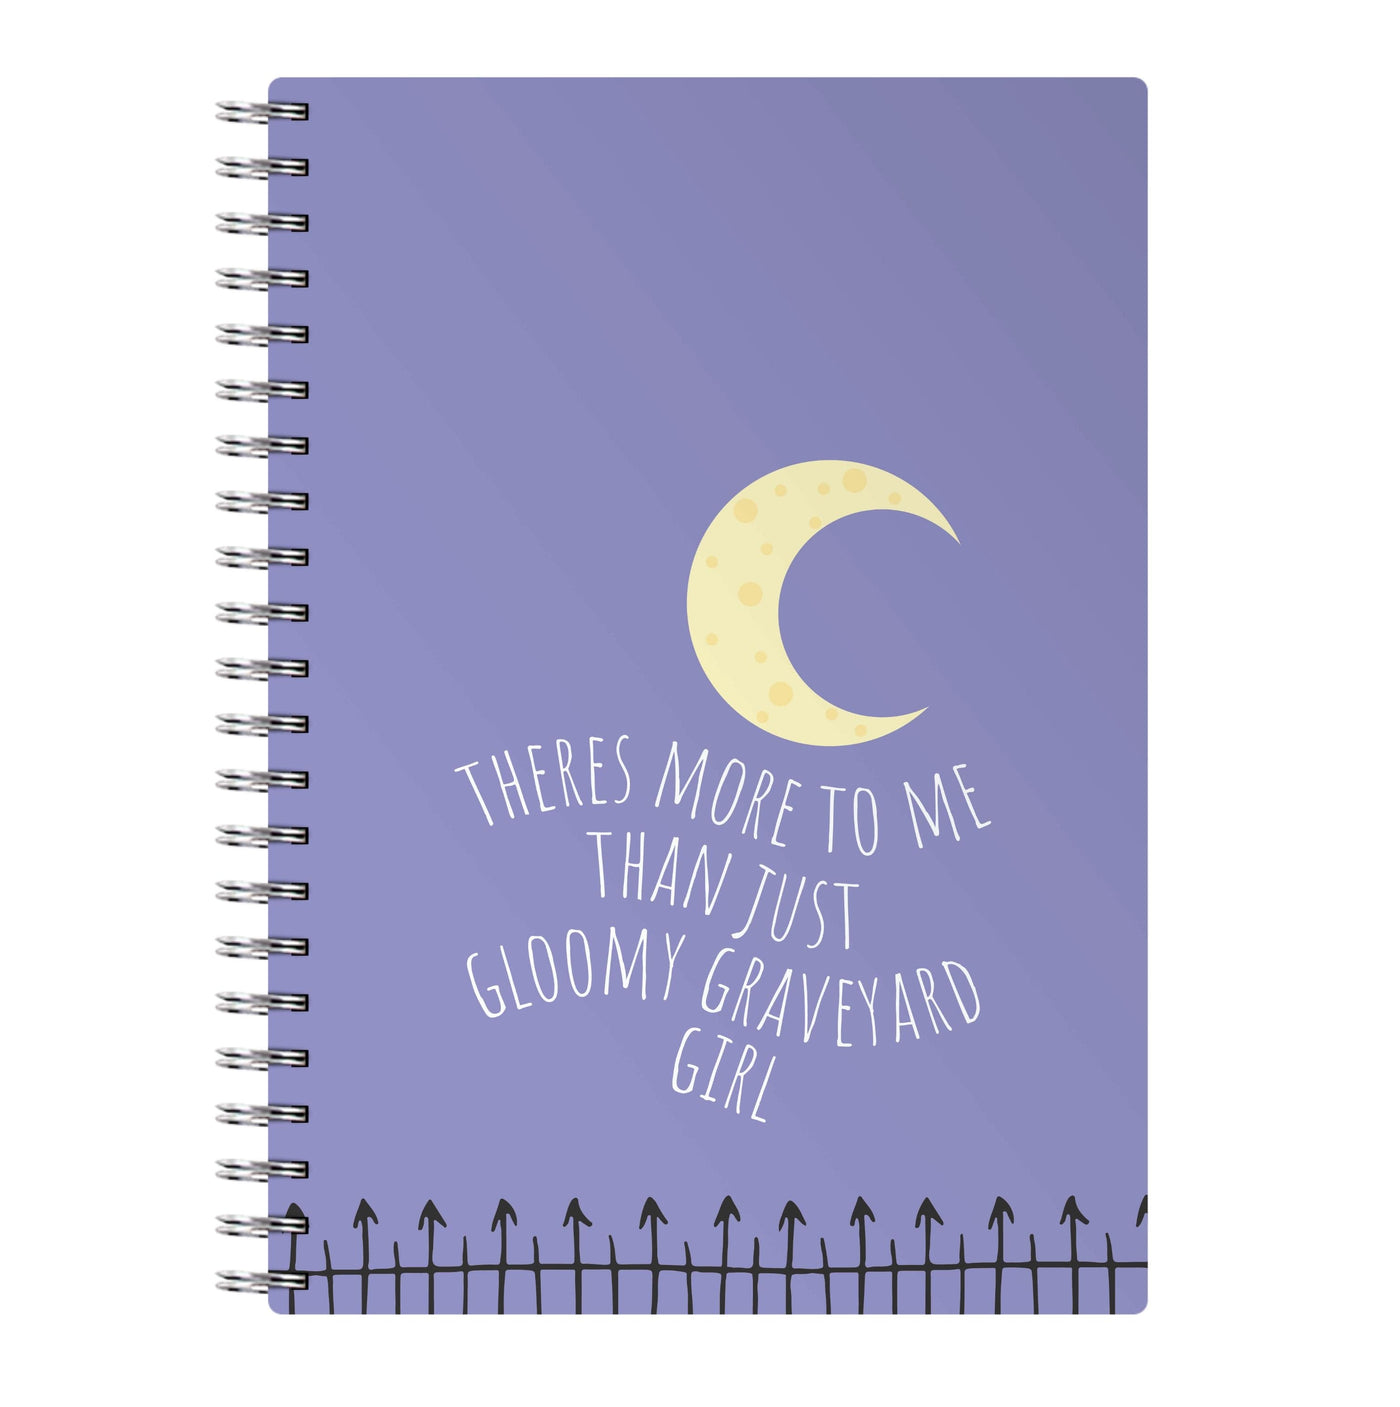 Theres More To Me - TV Quotes Notebook